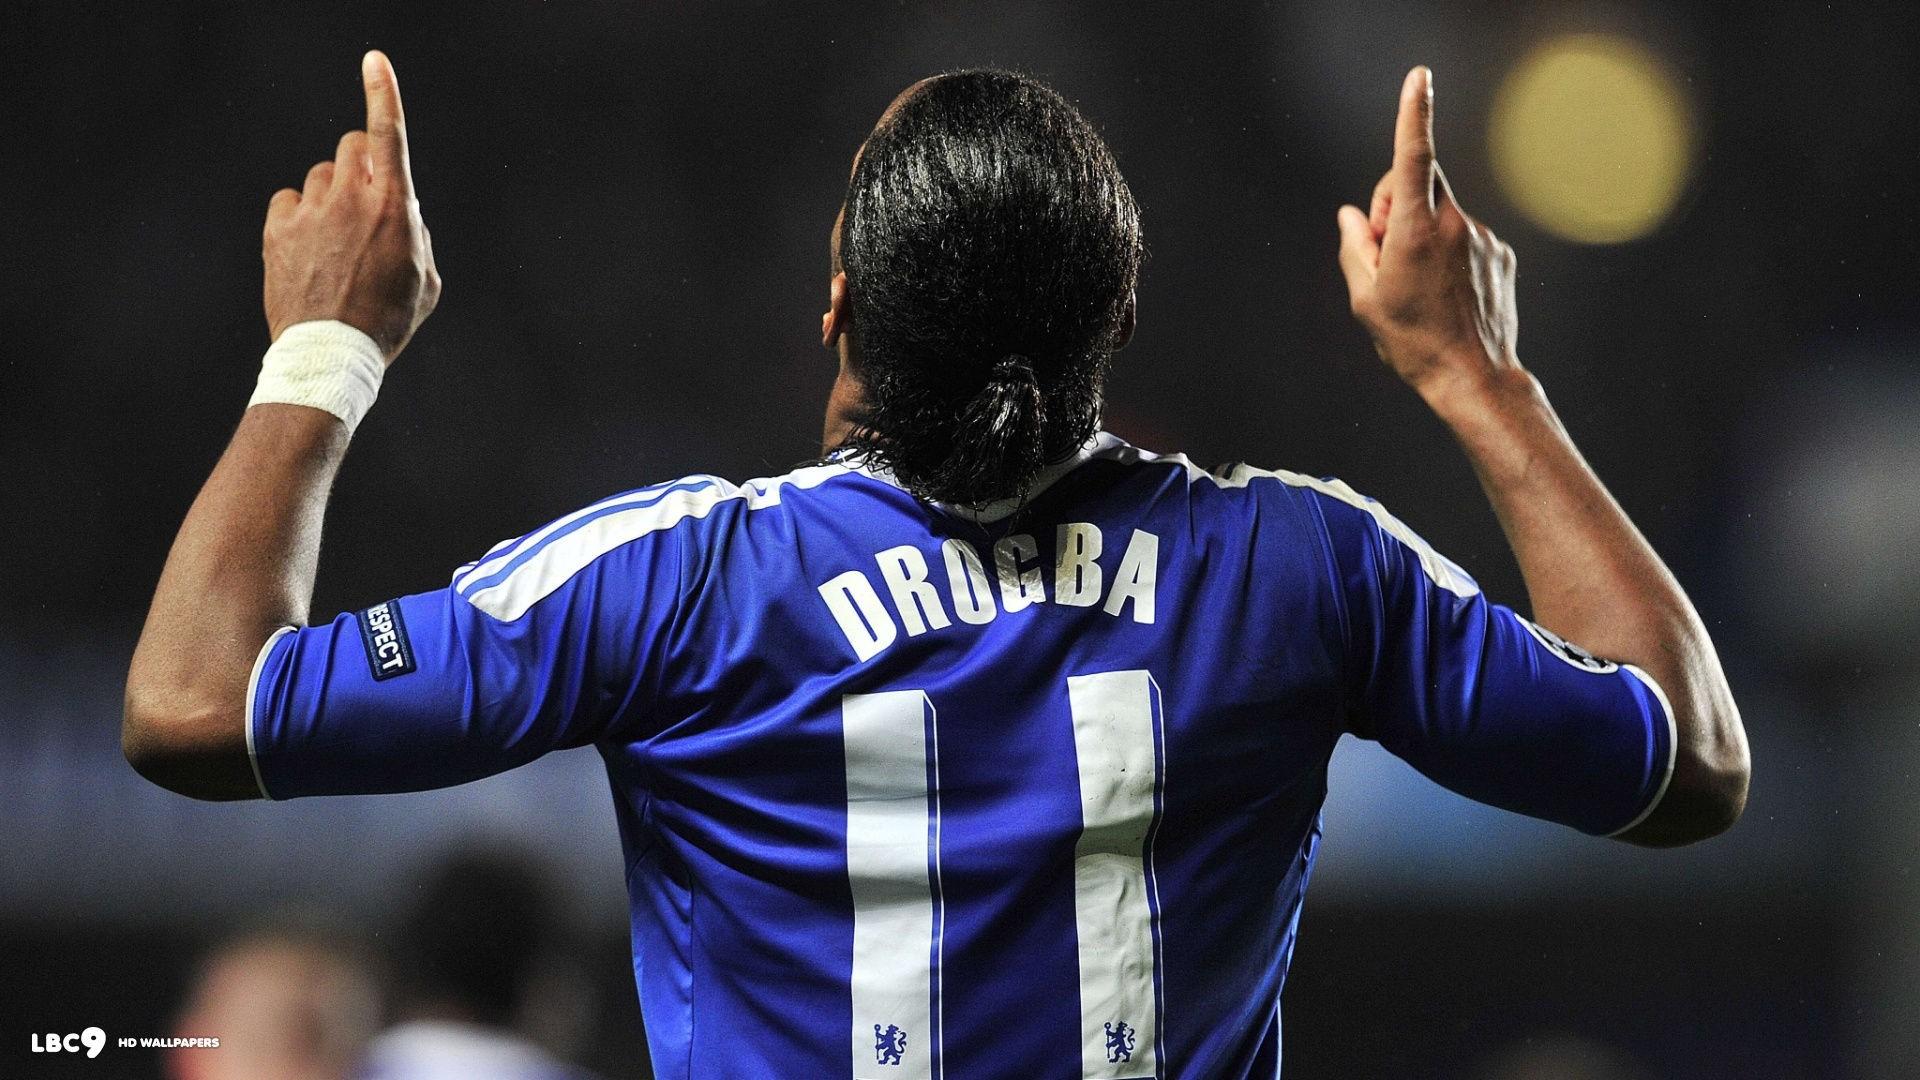 Chelsea FC, Didier Drogba Wallpaper HD / Desktop and Mobile Background